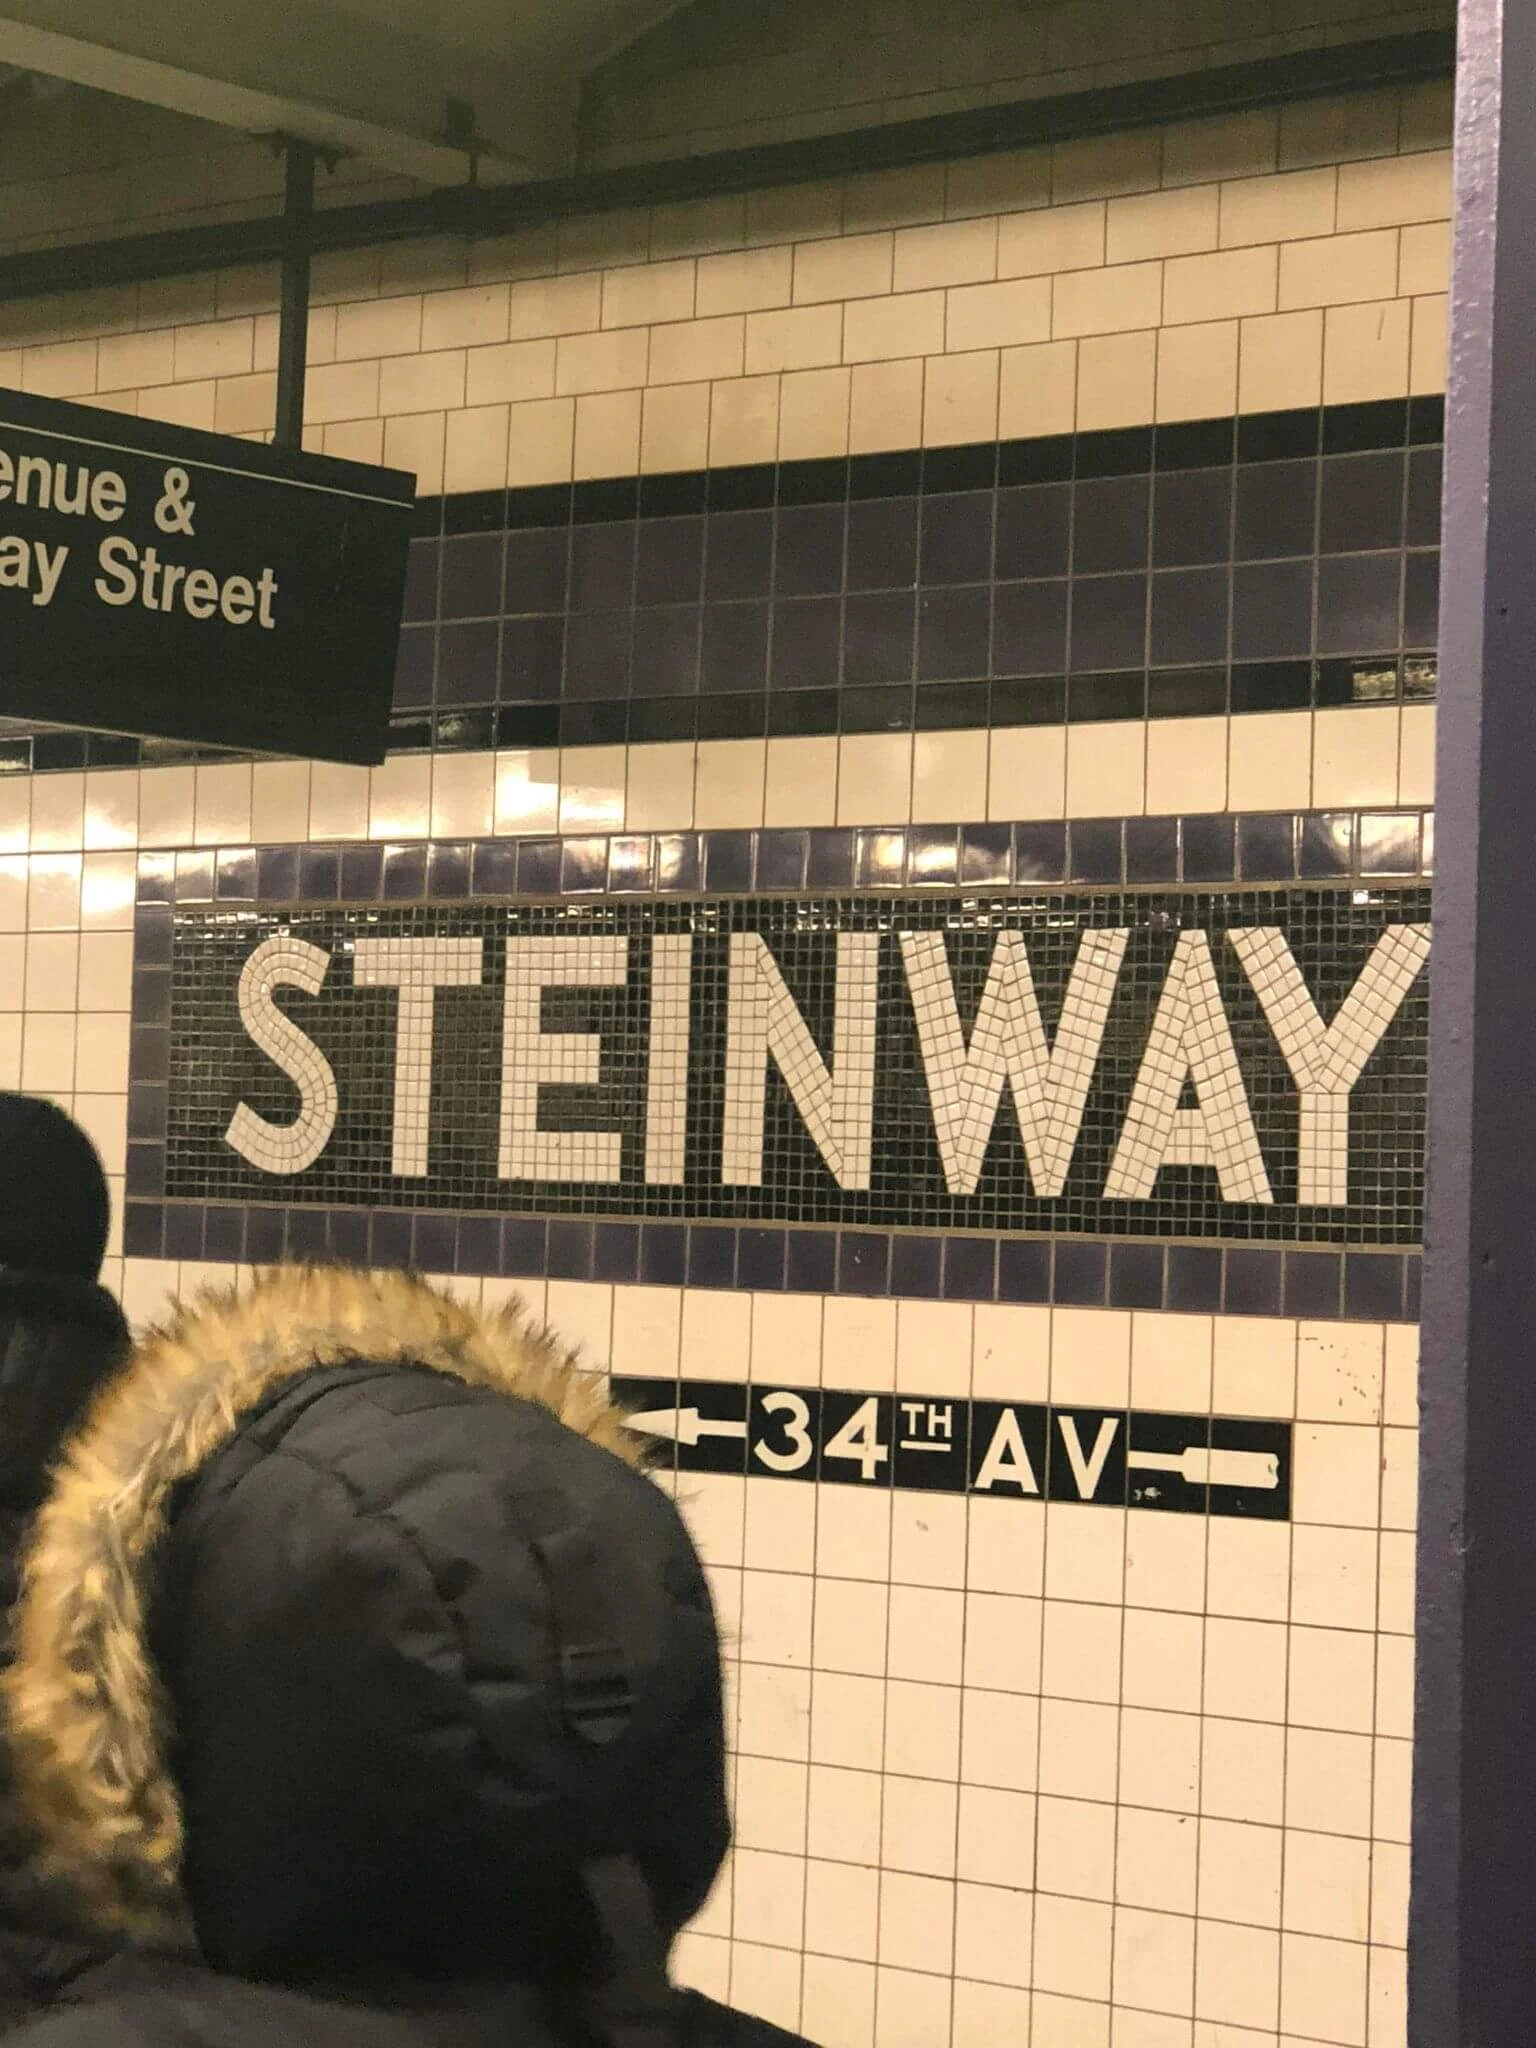 Paying a visit to Steinway & Sons in New York City